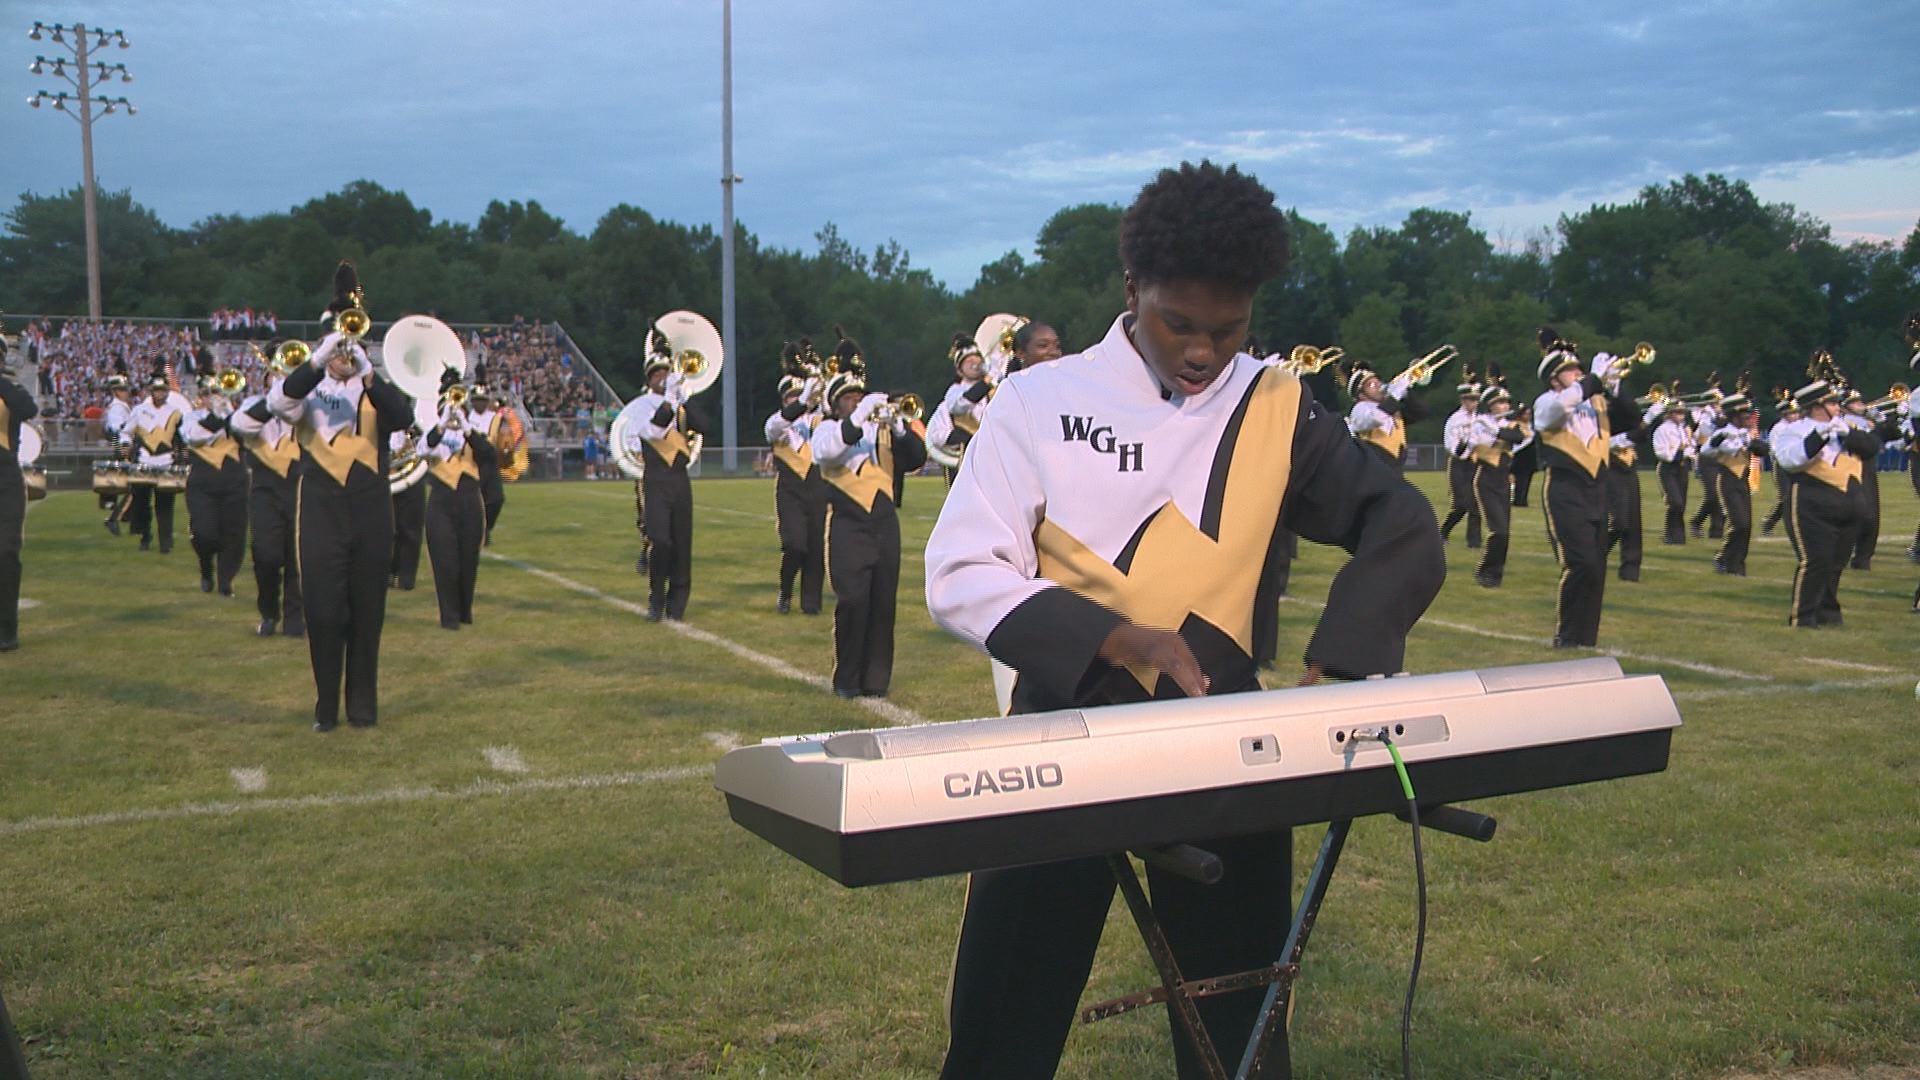 Piano prodigy brings new musical sound to Warren G. Harding band - WFMJ.com News weather sports